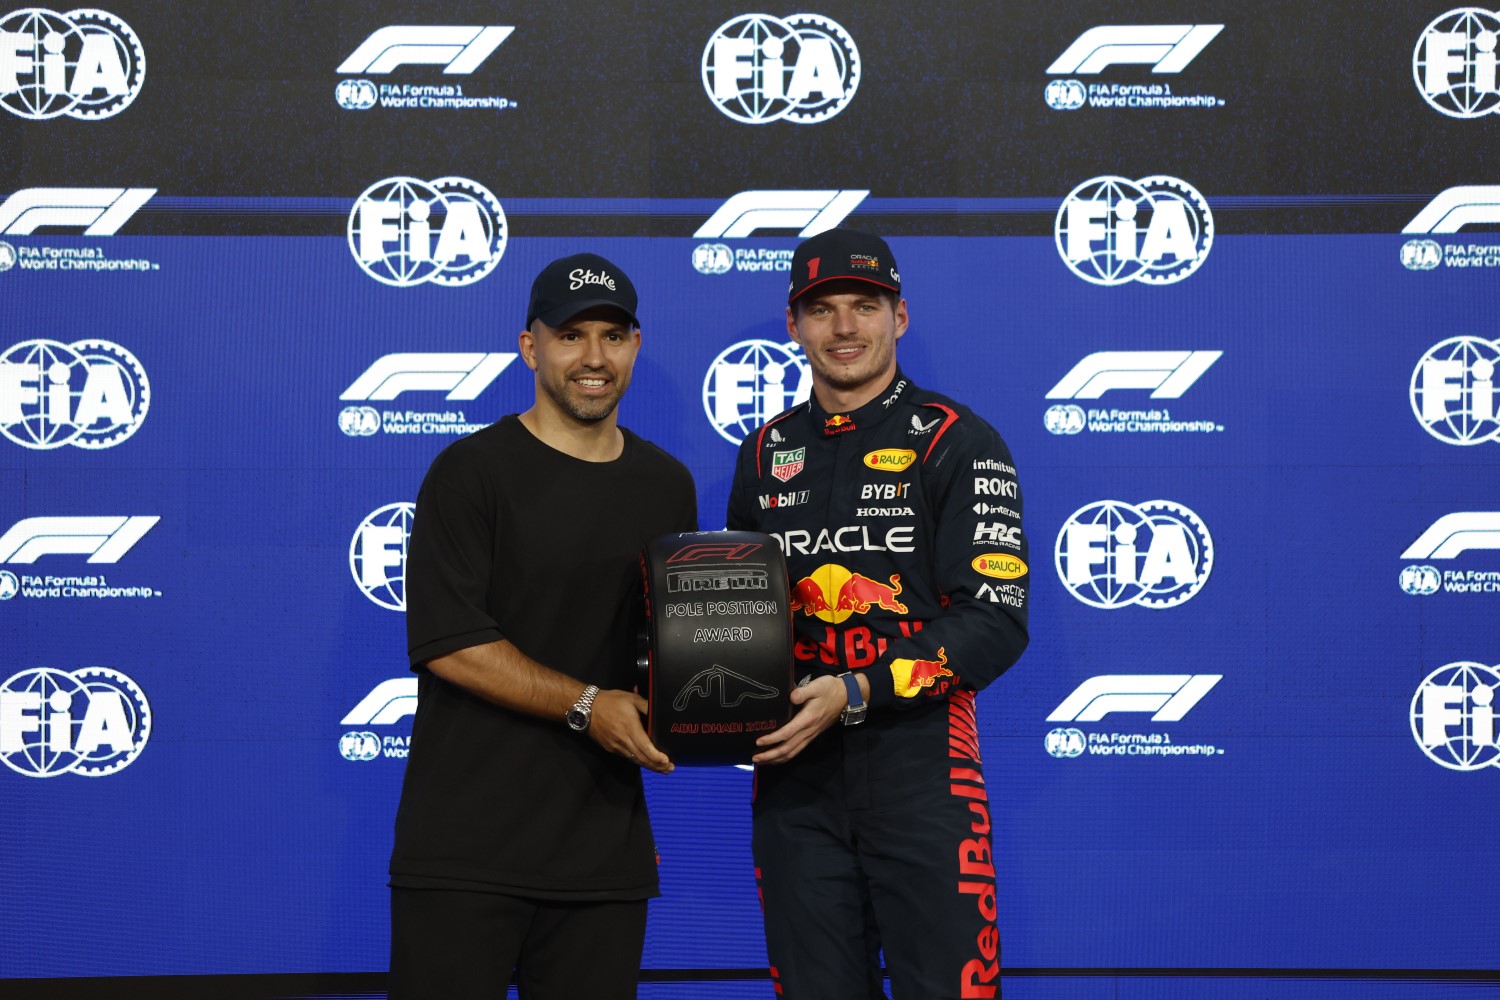 Former footballer Sergio Aguero presents Max Verstappen, Red Bull Racing, with his Pirelli Pole Position Award during the Abu Dhabi GP at Yas Marina Circuit on Saturday November 25, 2023 in Abu Dhabi, United Arab Emirates. (Photo by Steven Tee / LAT Images)